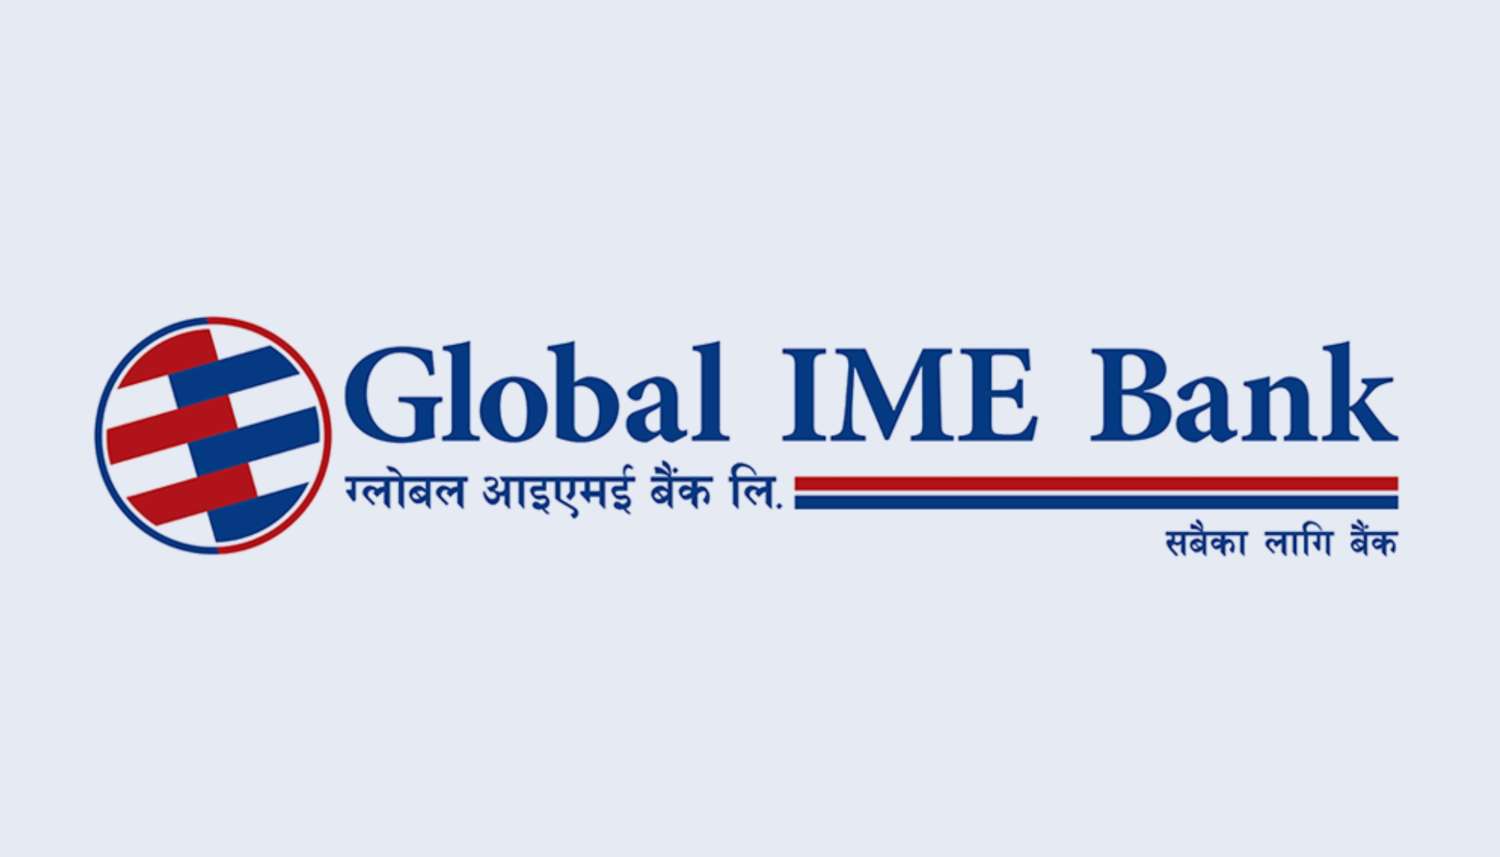 Global IME Bank Launches Financial Literacy Programme with Over 20,000 Participants